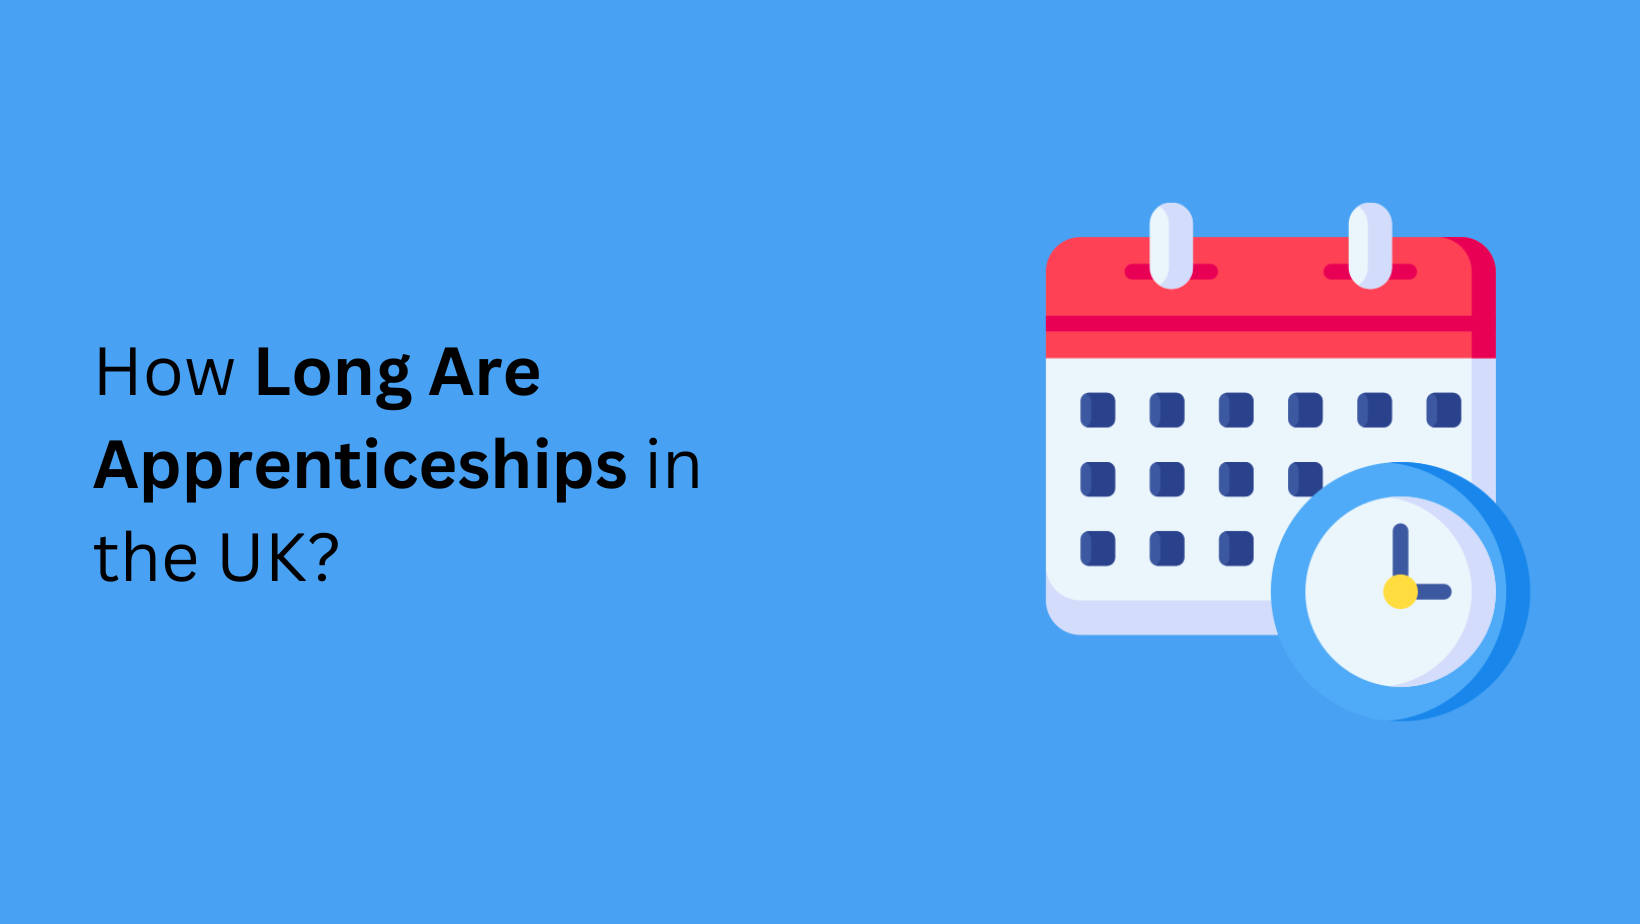 How Long Are Apprenticeships in the UK